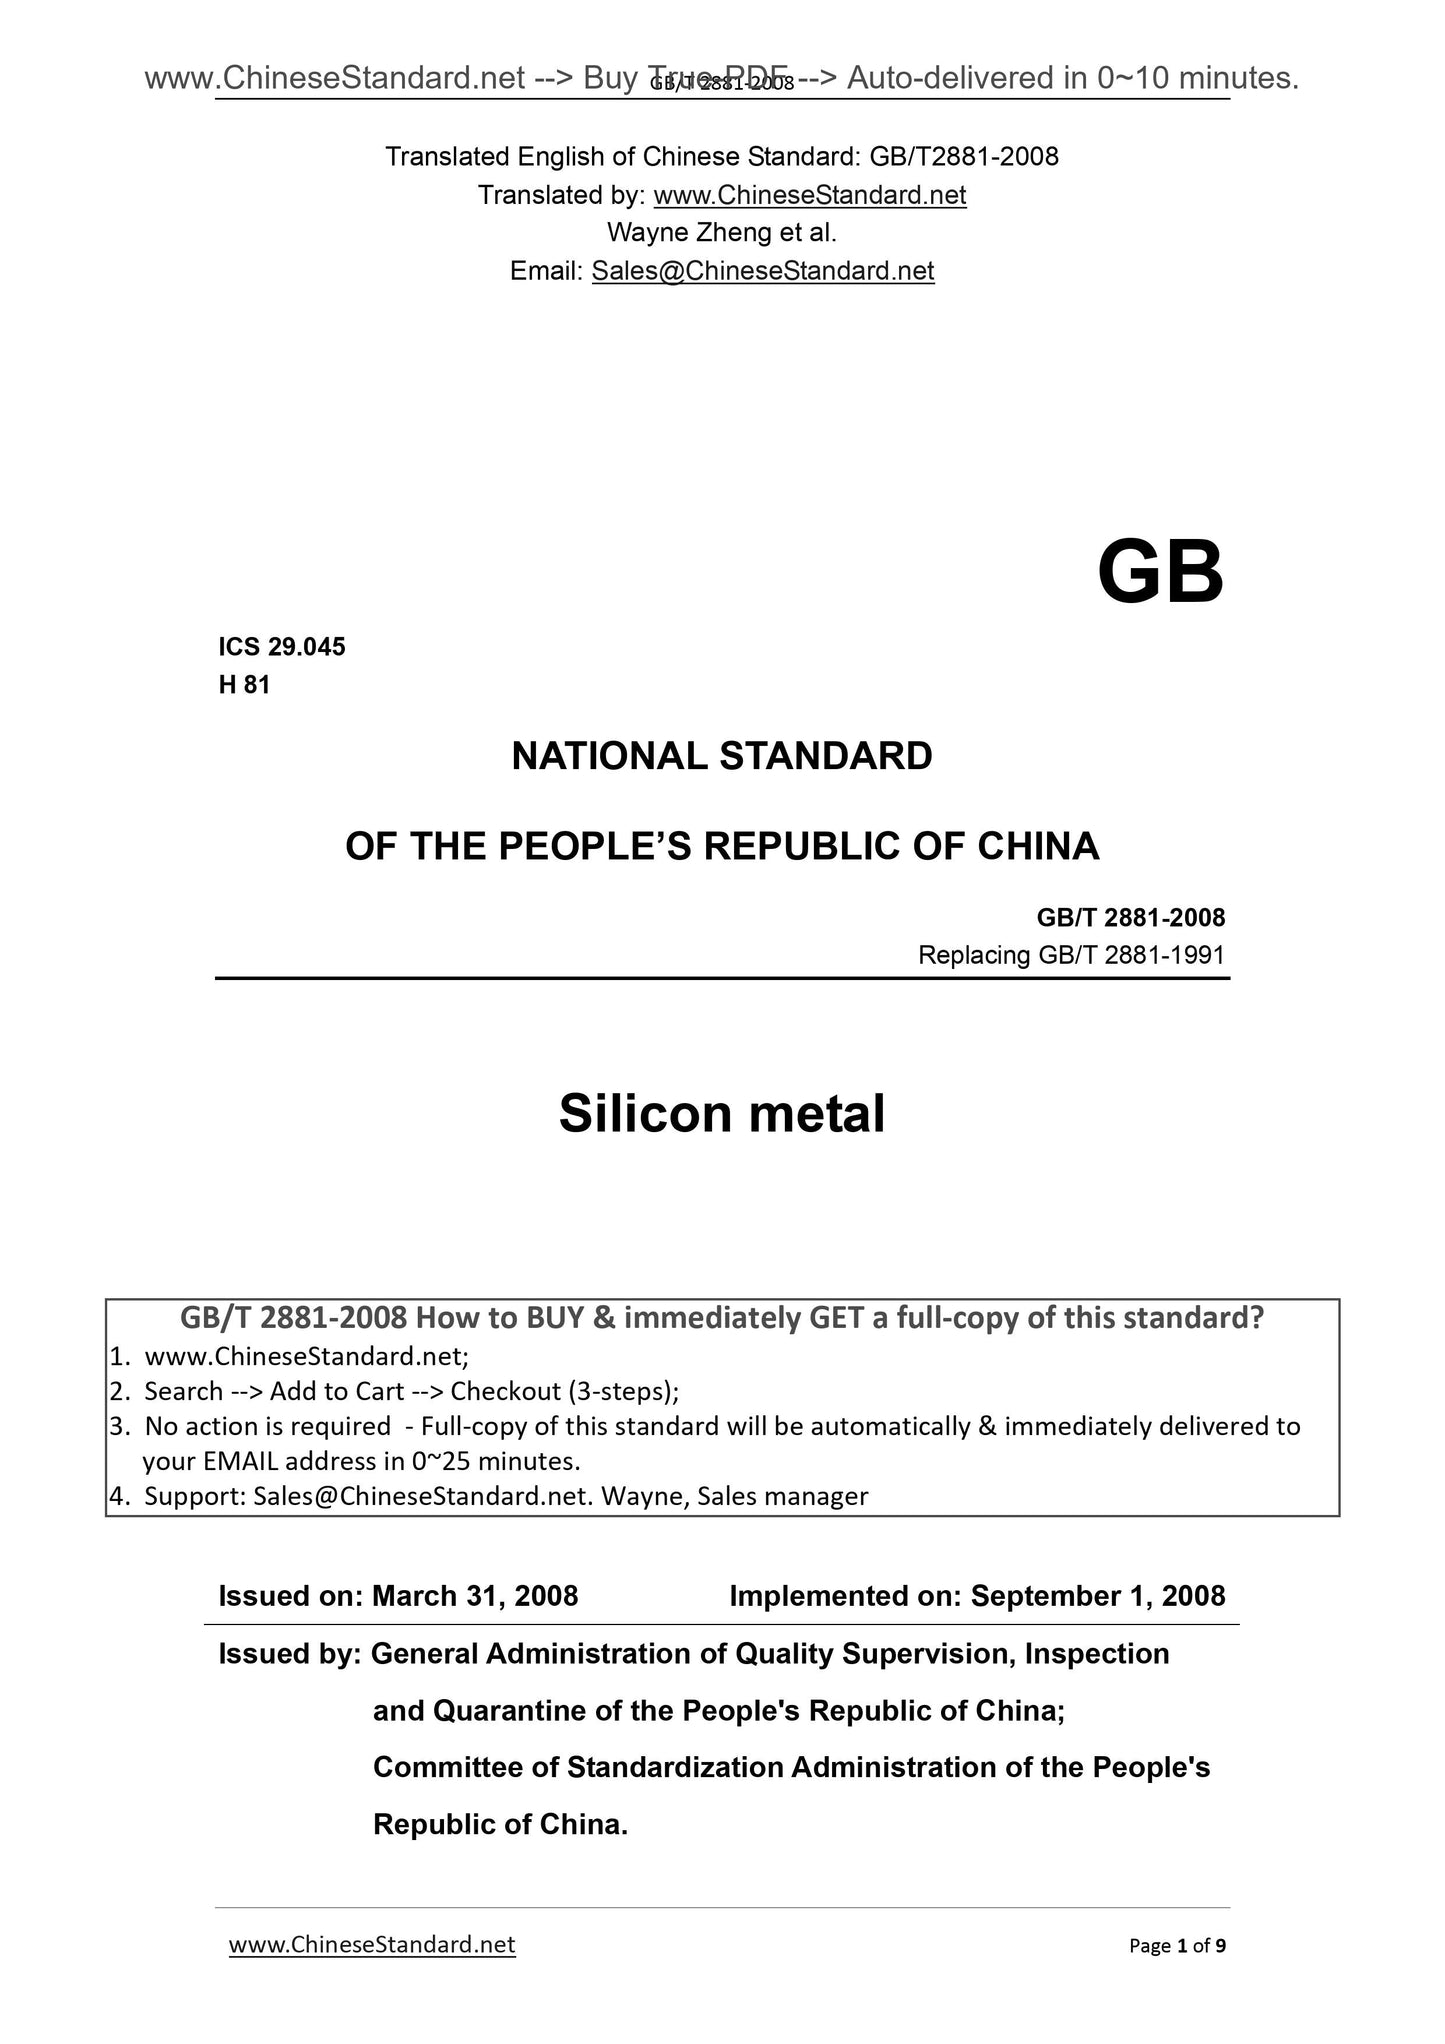 GB/T 2881-2008 Page 1